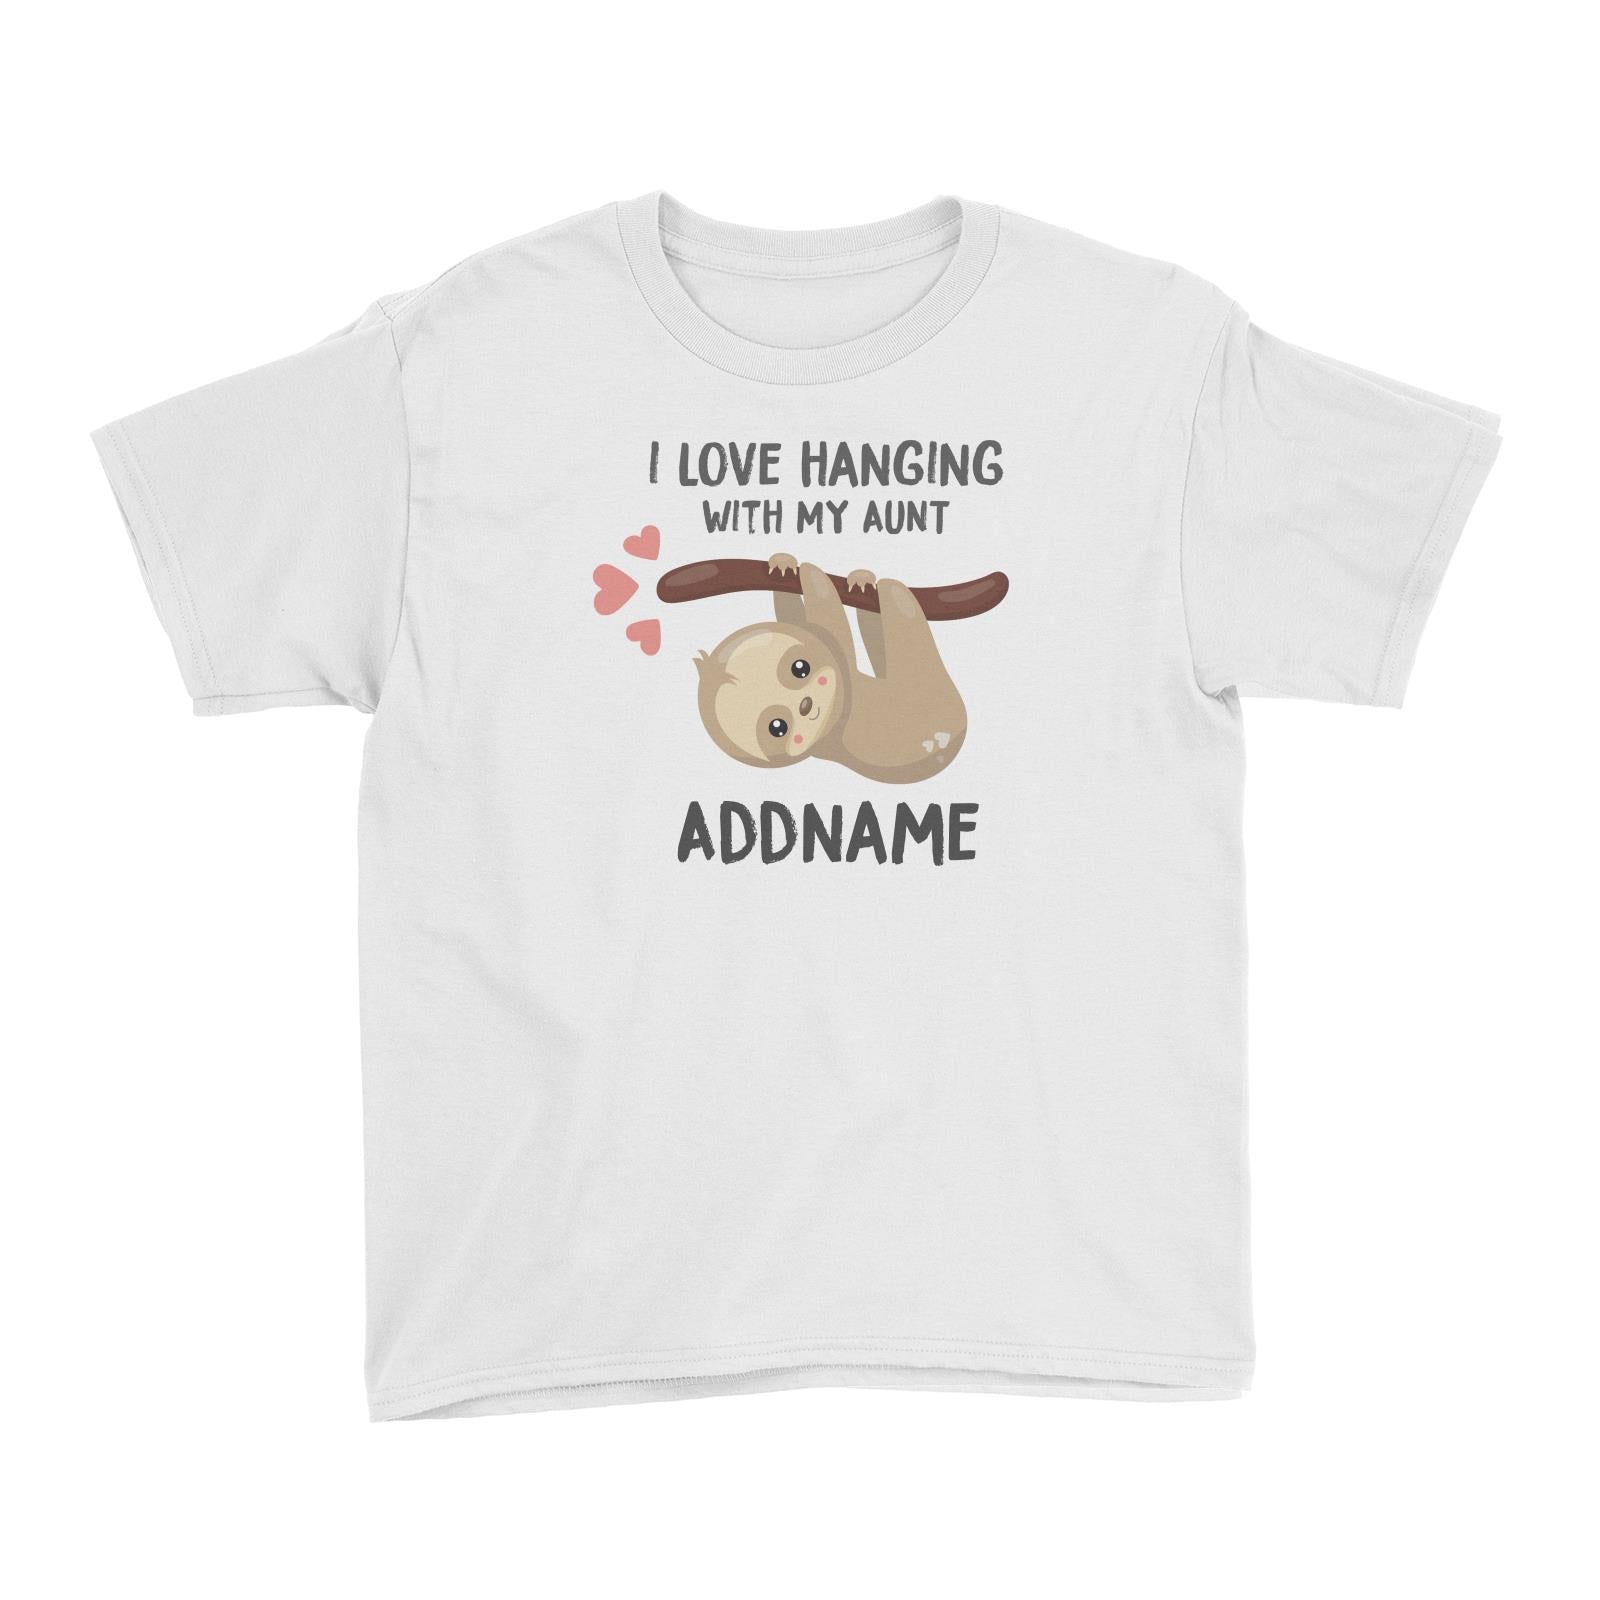 Cute Sloth I Love Hanging With My Aunt Addname Kid's T-Shirt